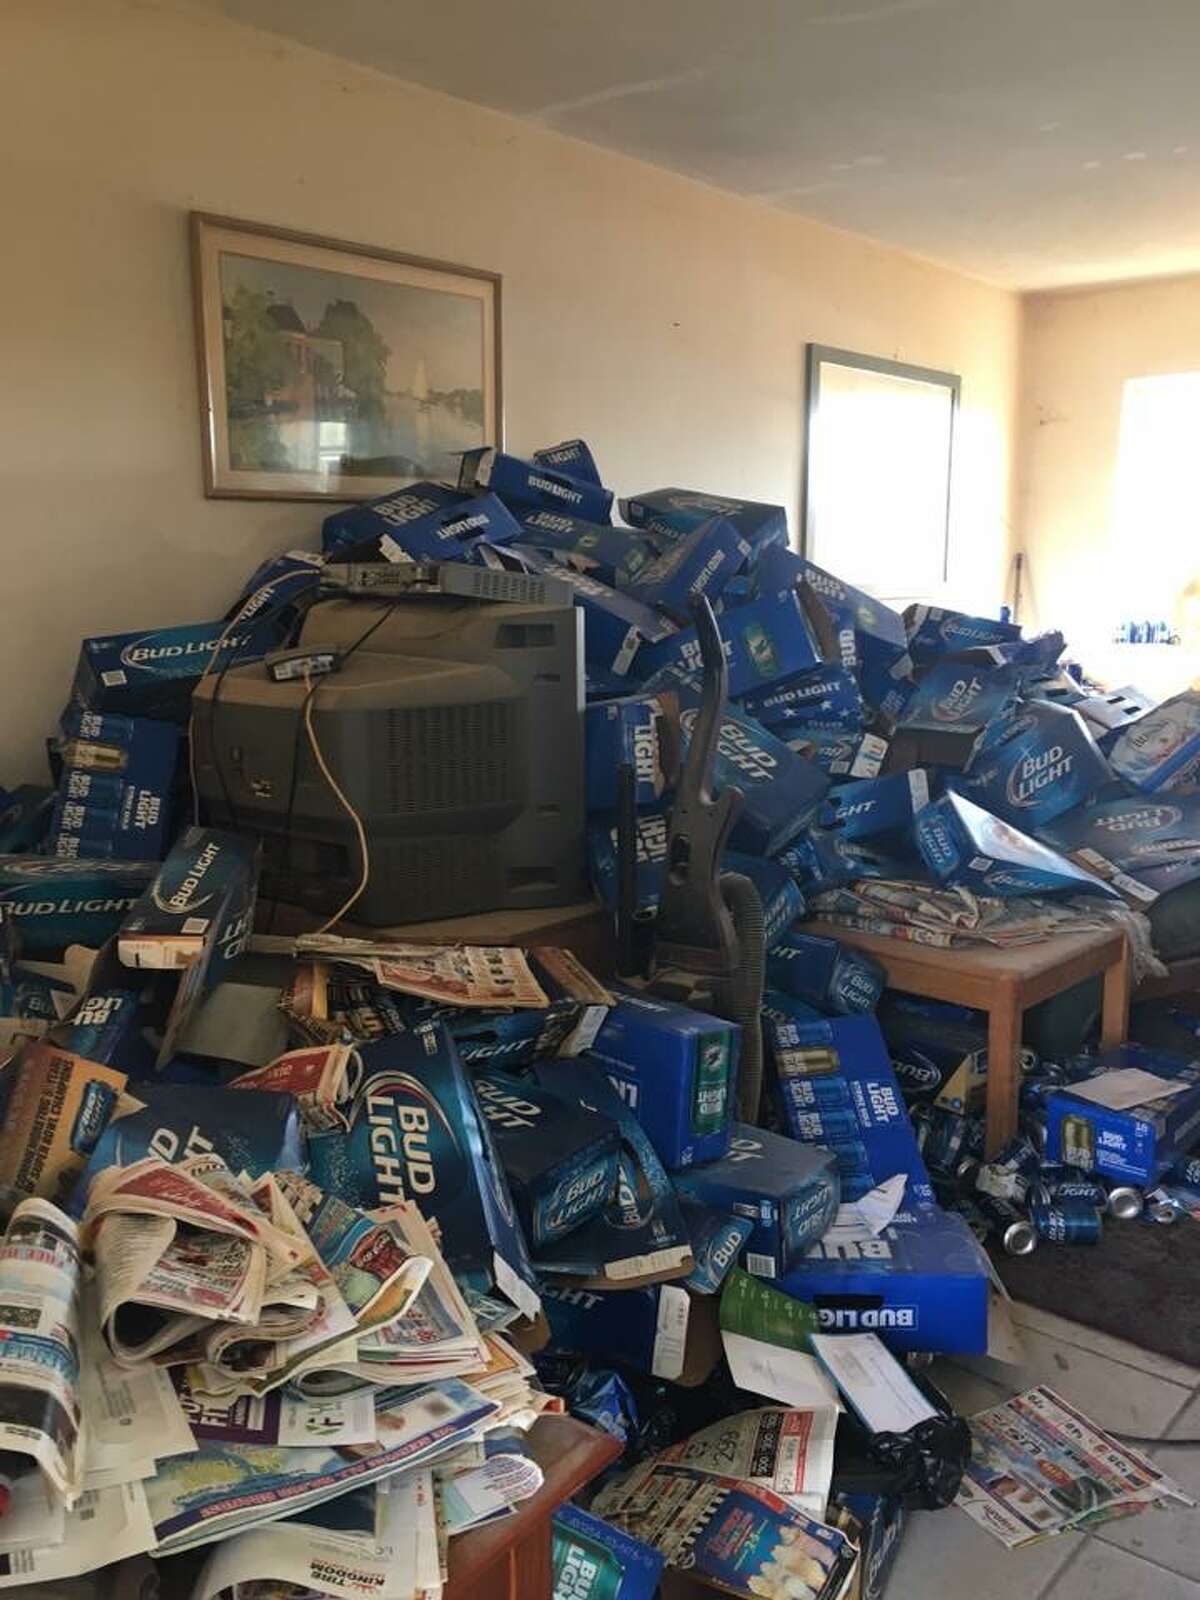 Property company finds evicted tenants left mountains of Bud Light cans,  boxes throughout home